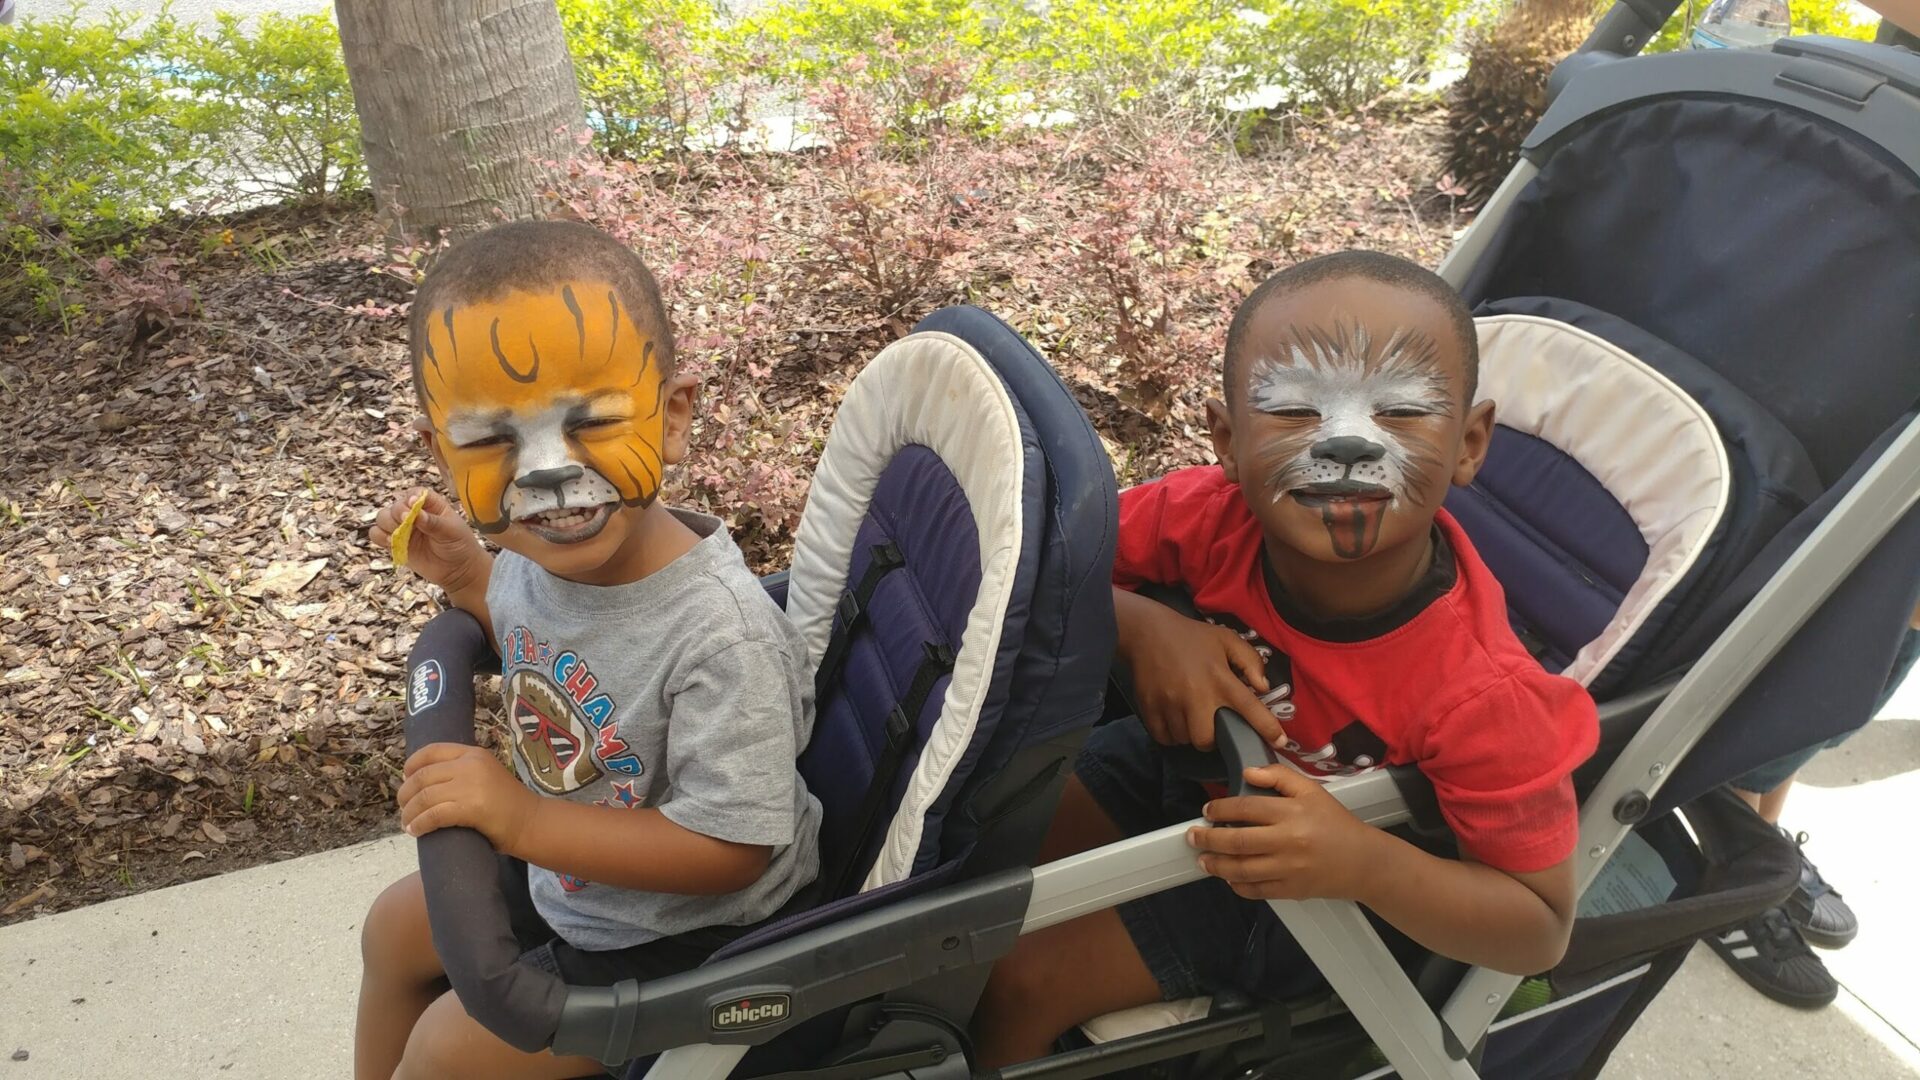 Two children with face paint sitting in a stroller.